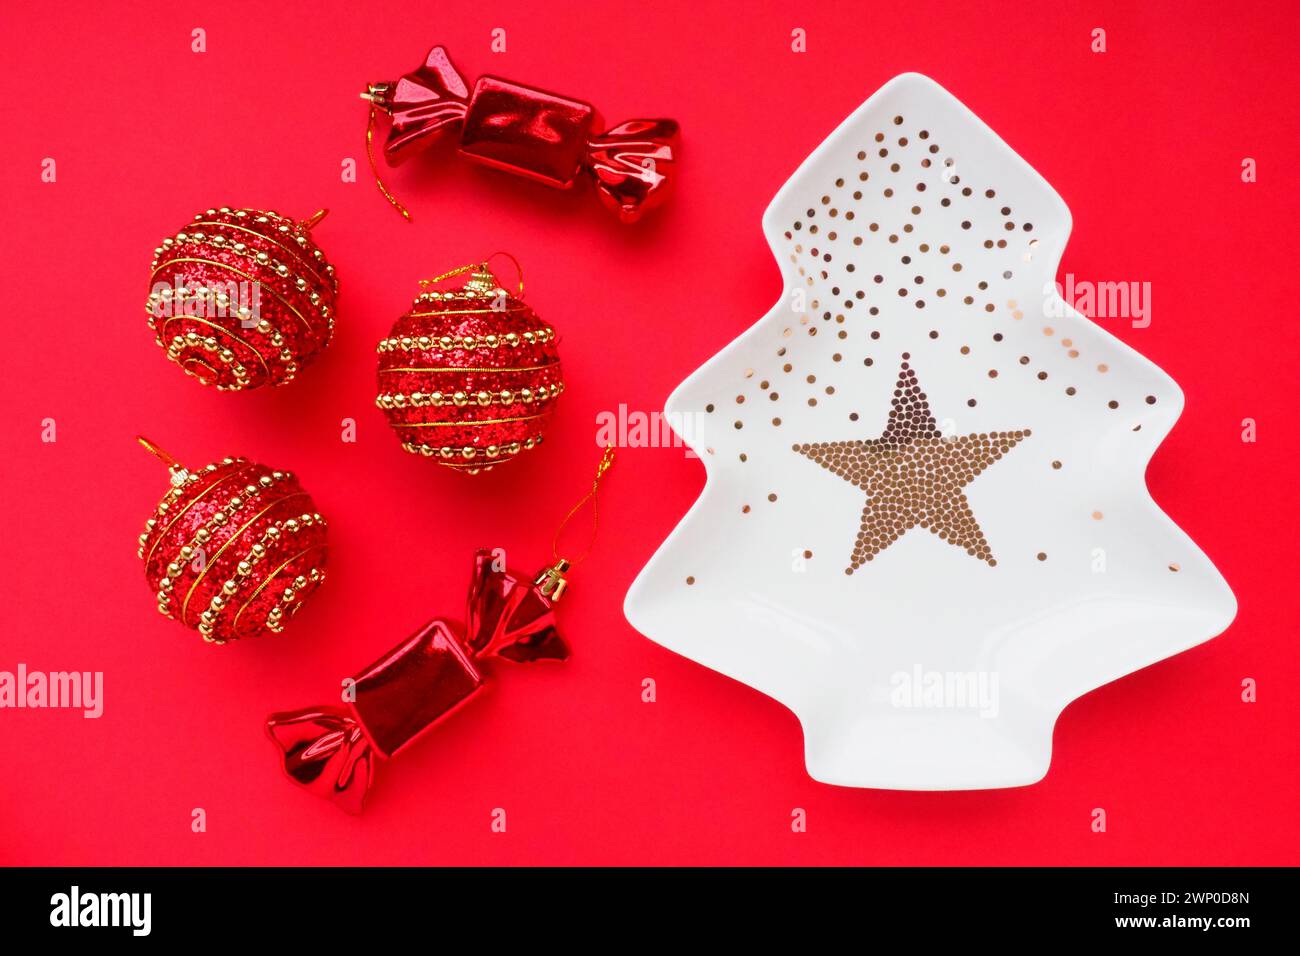 Christmas tree with gold ornaments and a star in the middle. Red background. Christmas decorations and two sweet candies. Three red balls with gold Stock Photo